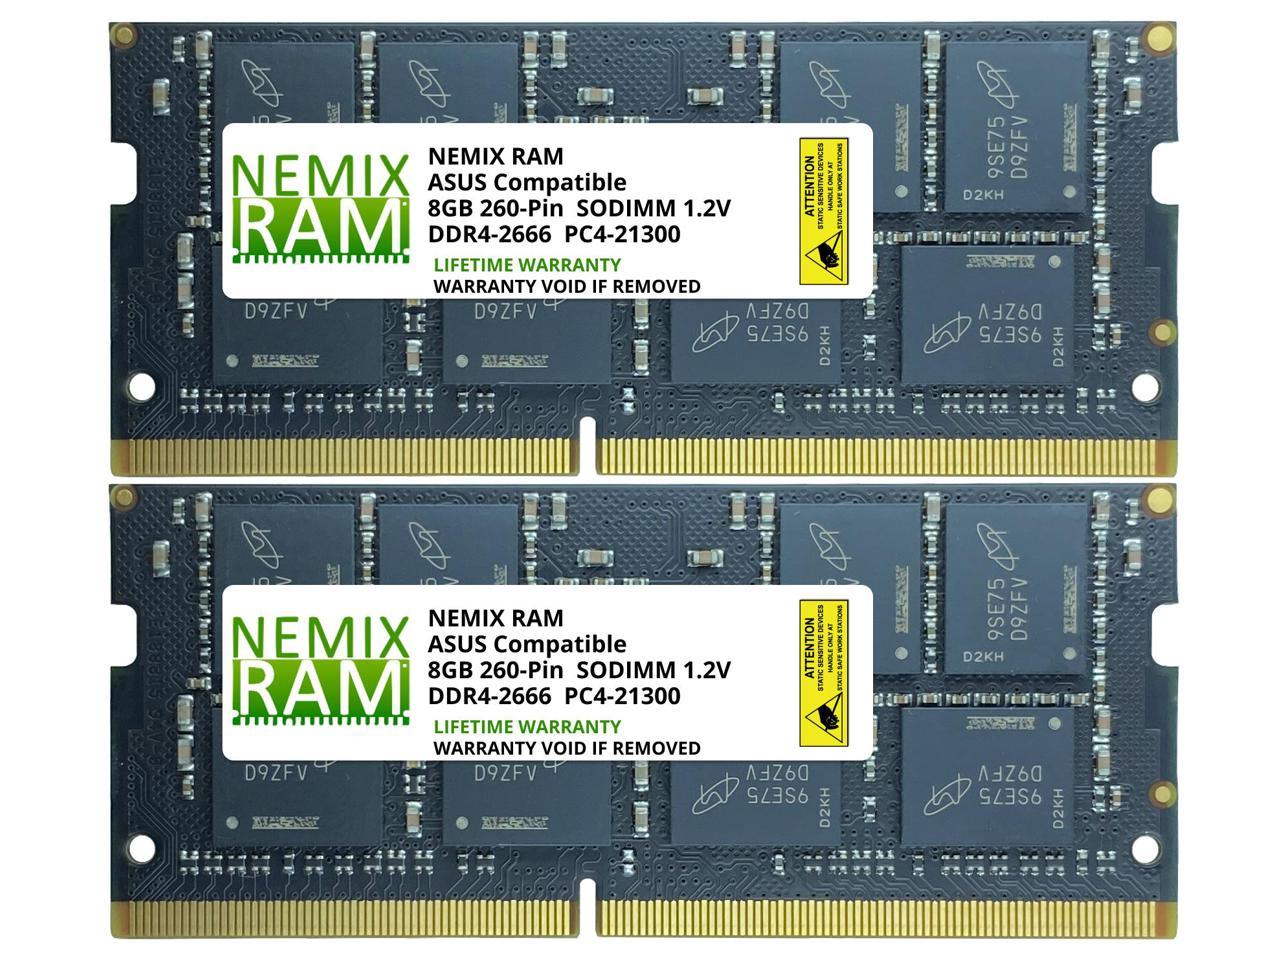 NEMIX RAM 16GB Kit (2 x 8GB) DDR4-2666 SODIMM 1Rx8 Memory for ASUS All-in-O  品質は非常に良い